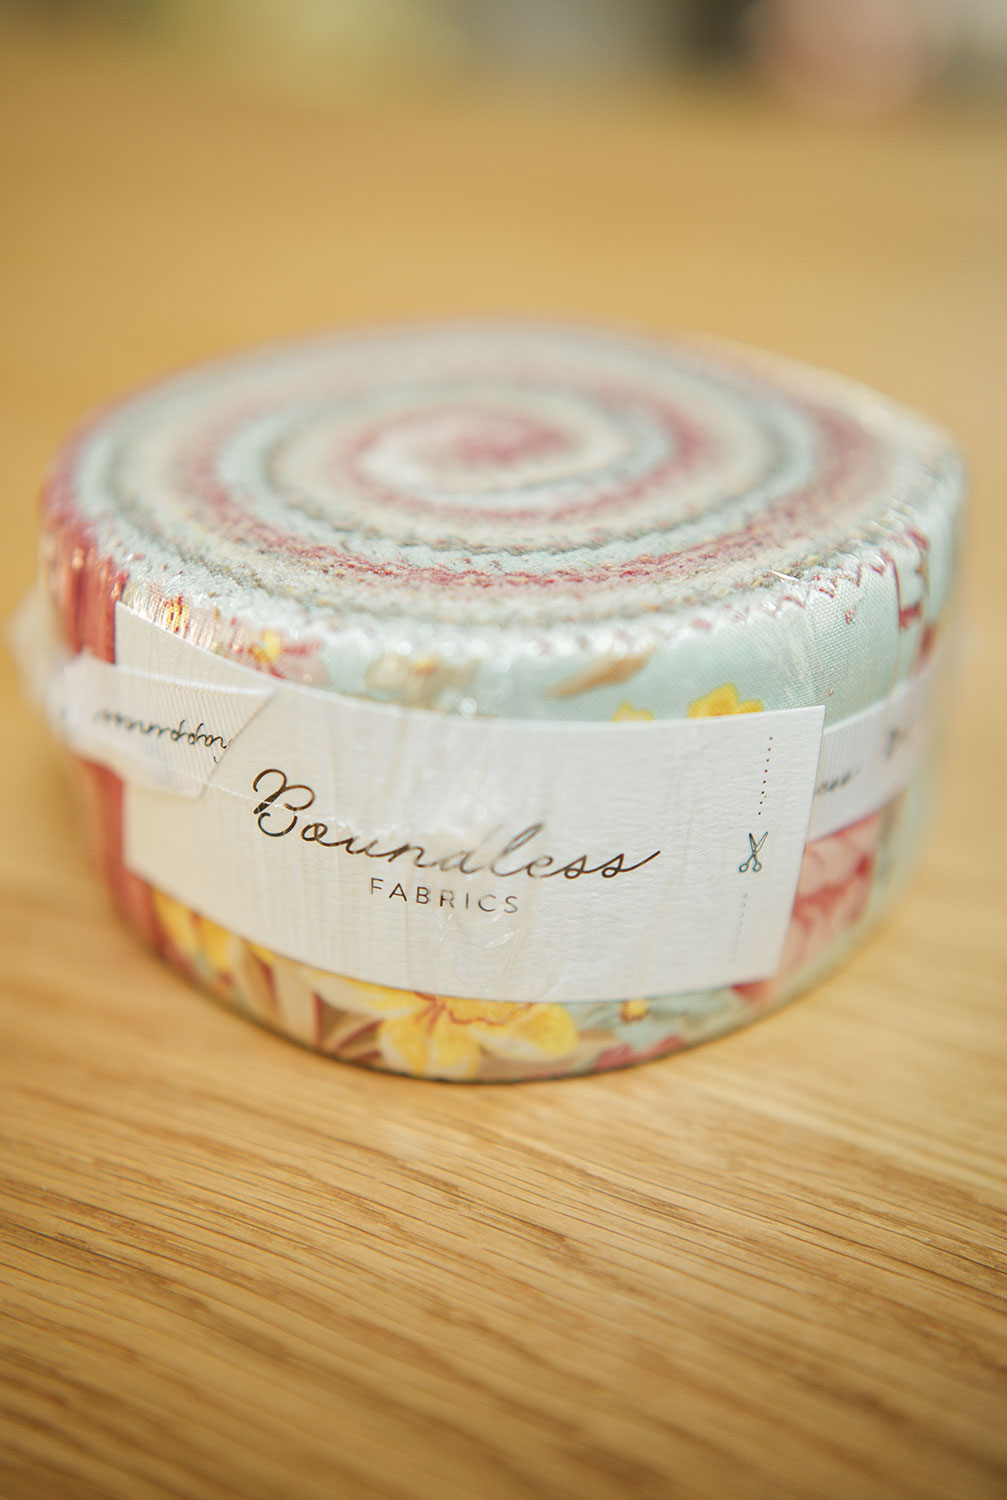 a jelly roll fabric package in pastle colors